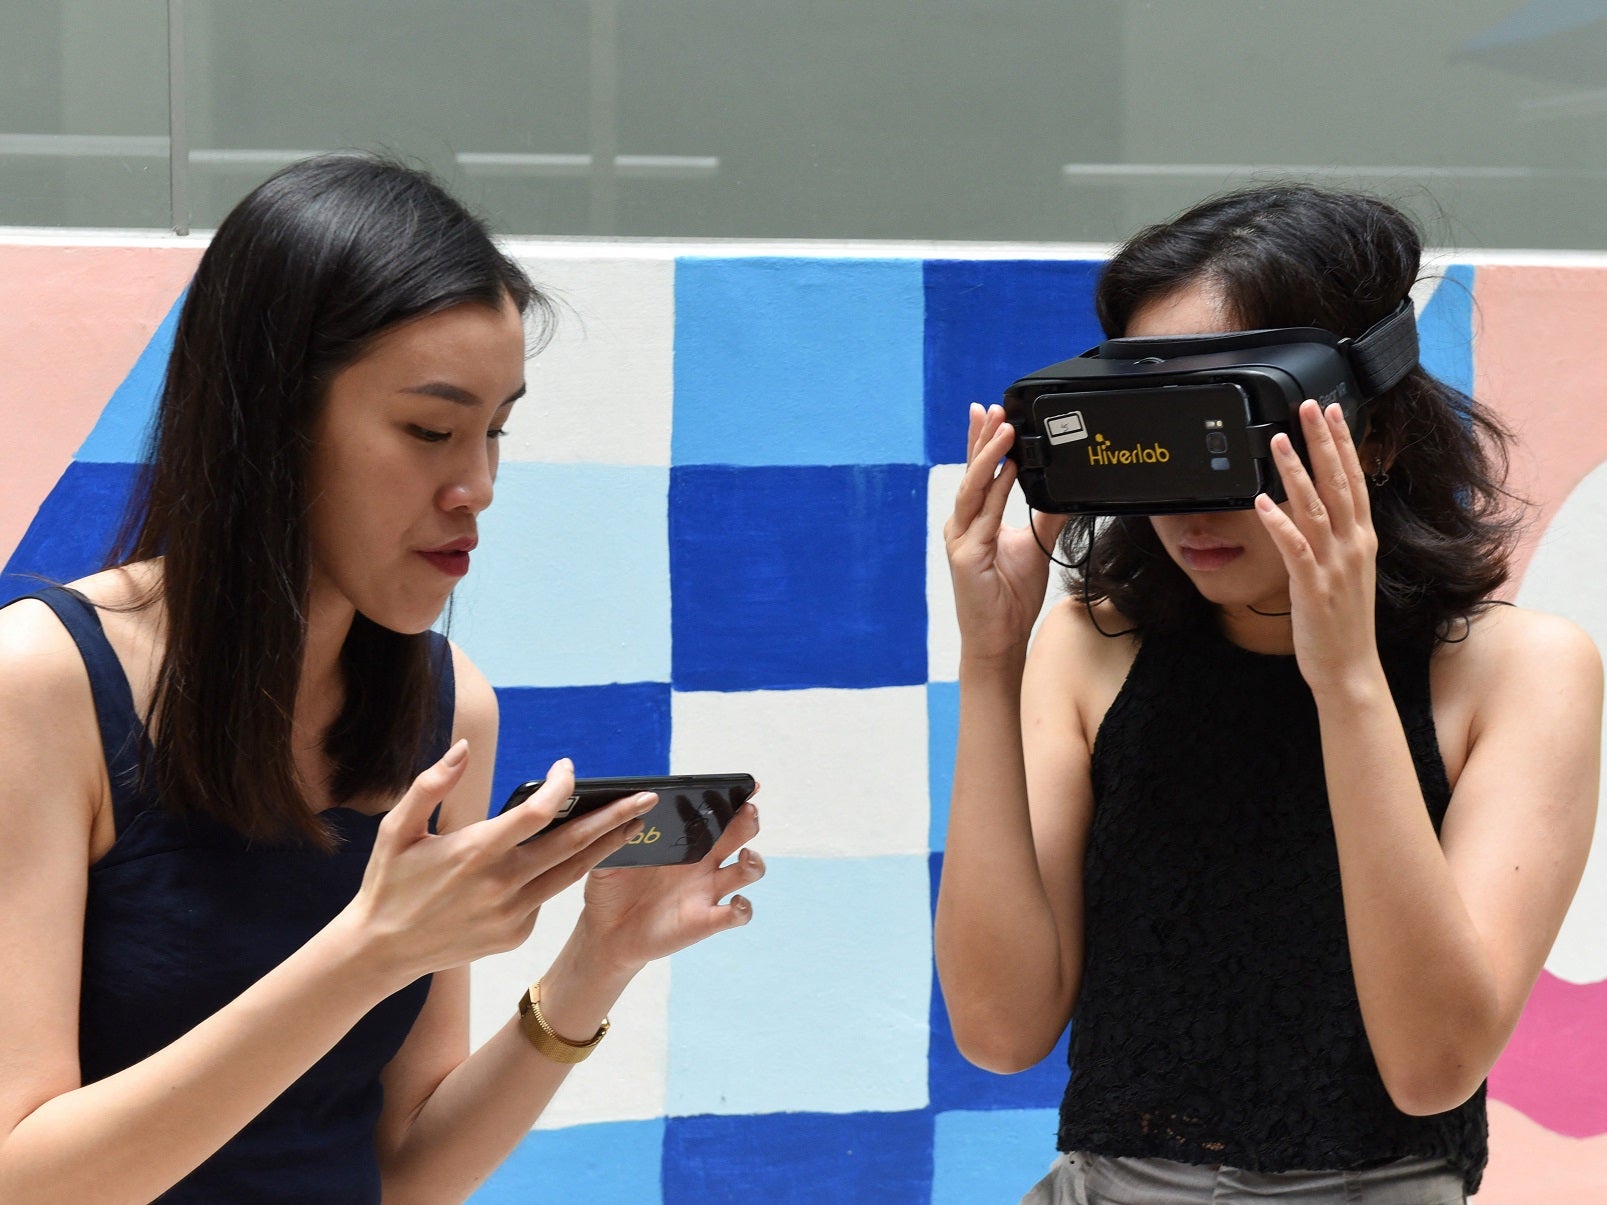 A student is guided through a virtual reality simulation at the Nanyang Technological University in Singapore on 10 March, 2020